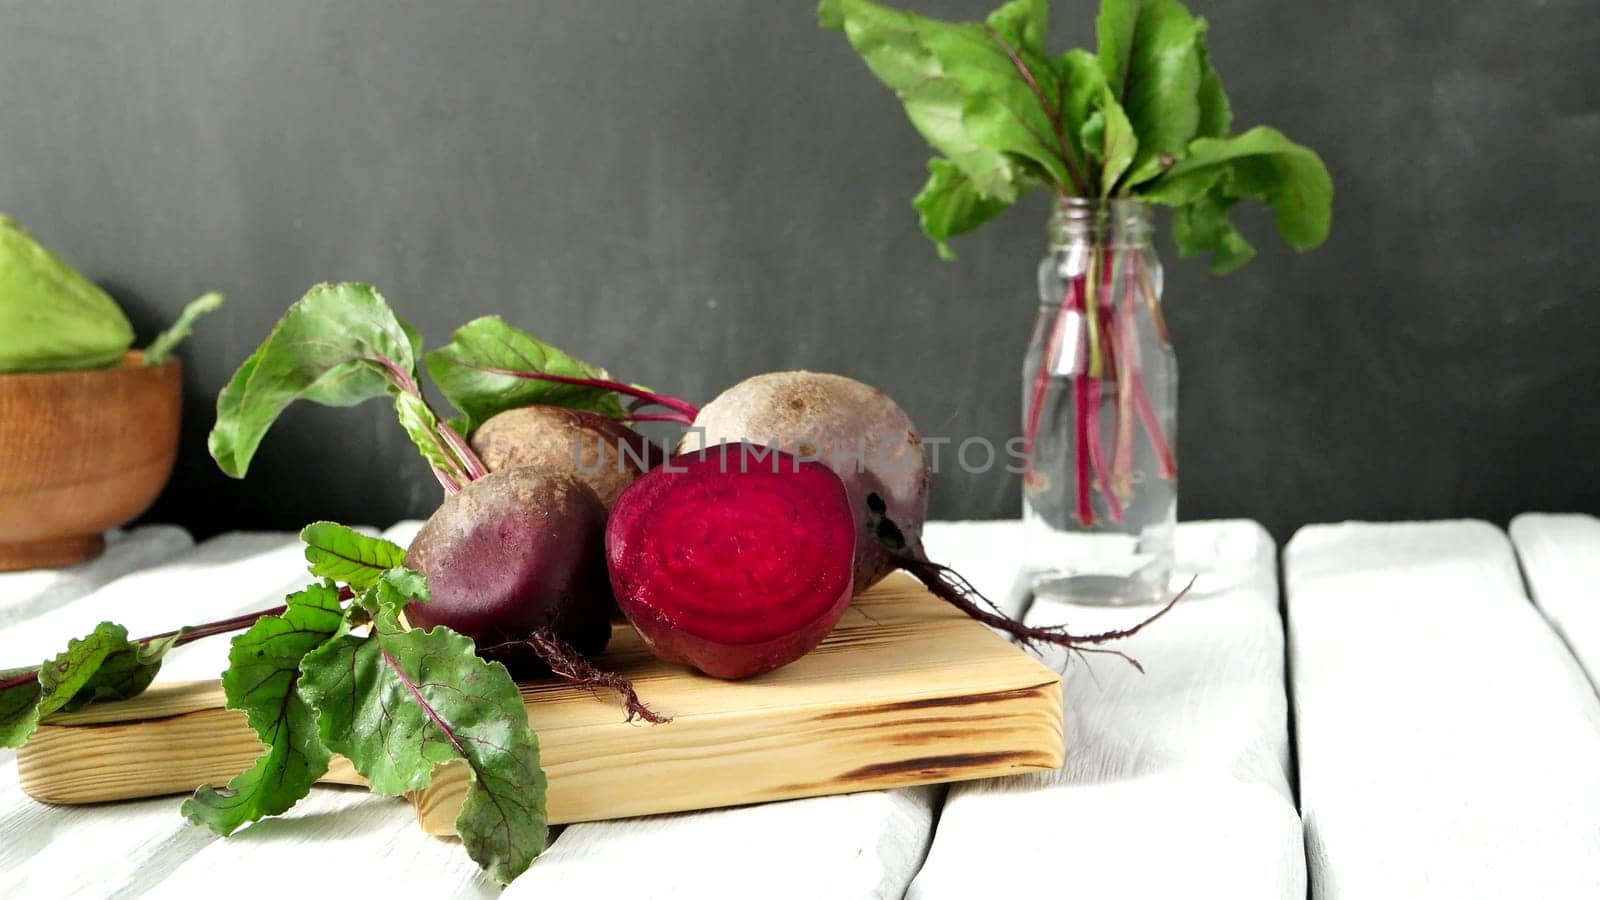 Beetroots on white painted rustic wooden table with slate background.